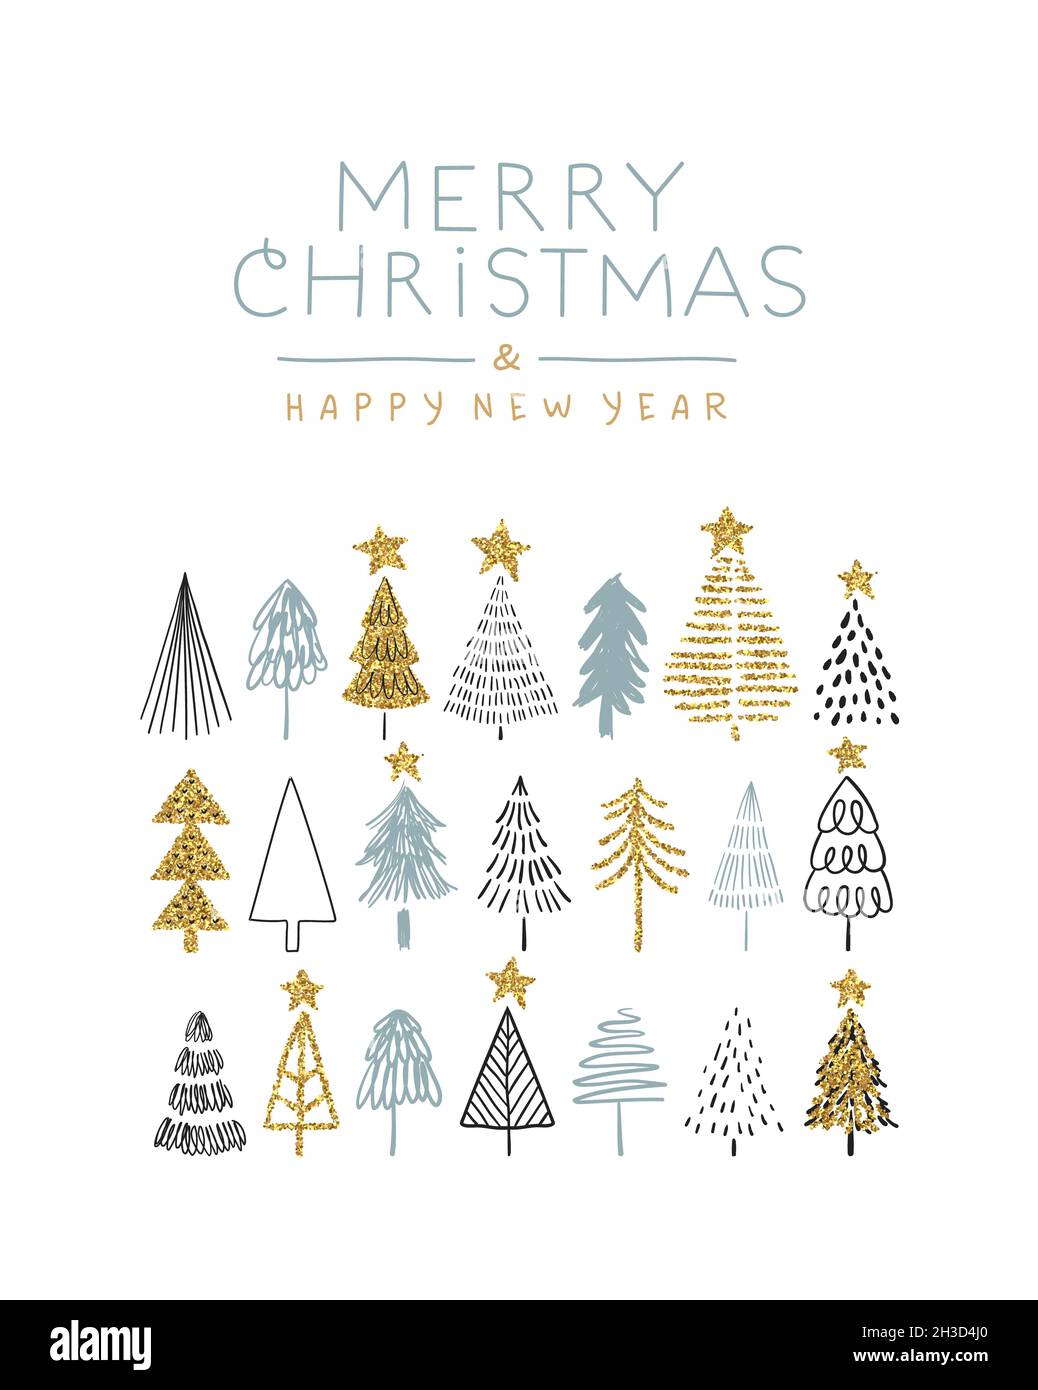 Merry Christmas Happy New Year greeting card illustration of luxury gold glitter pine tree doodle. Cute scandinavian style cartoon for party invitatio Stock Photo